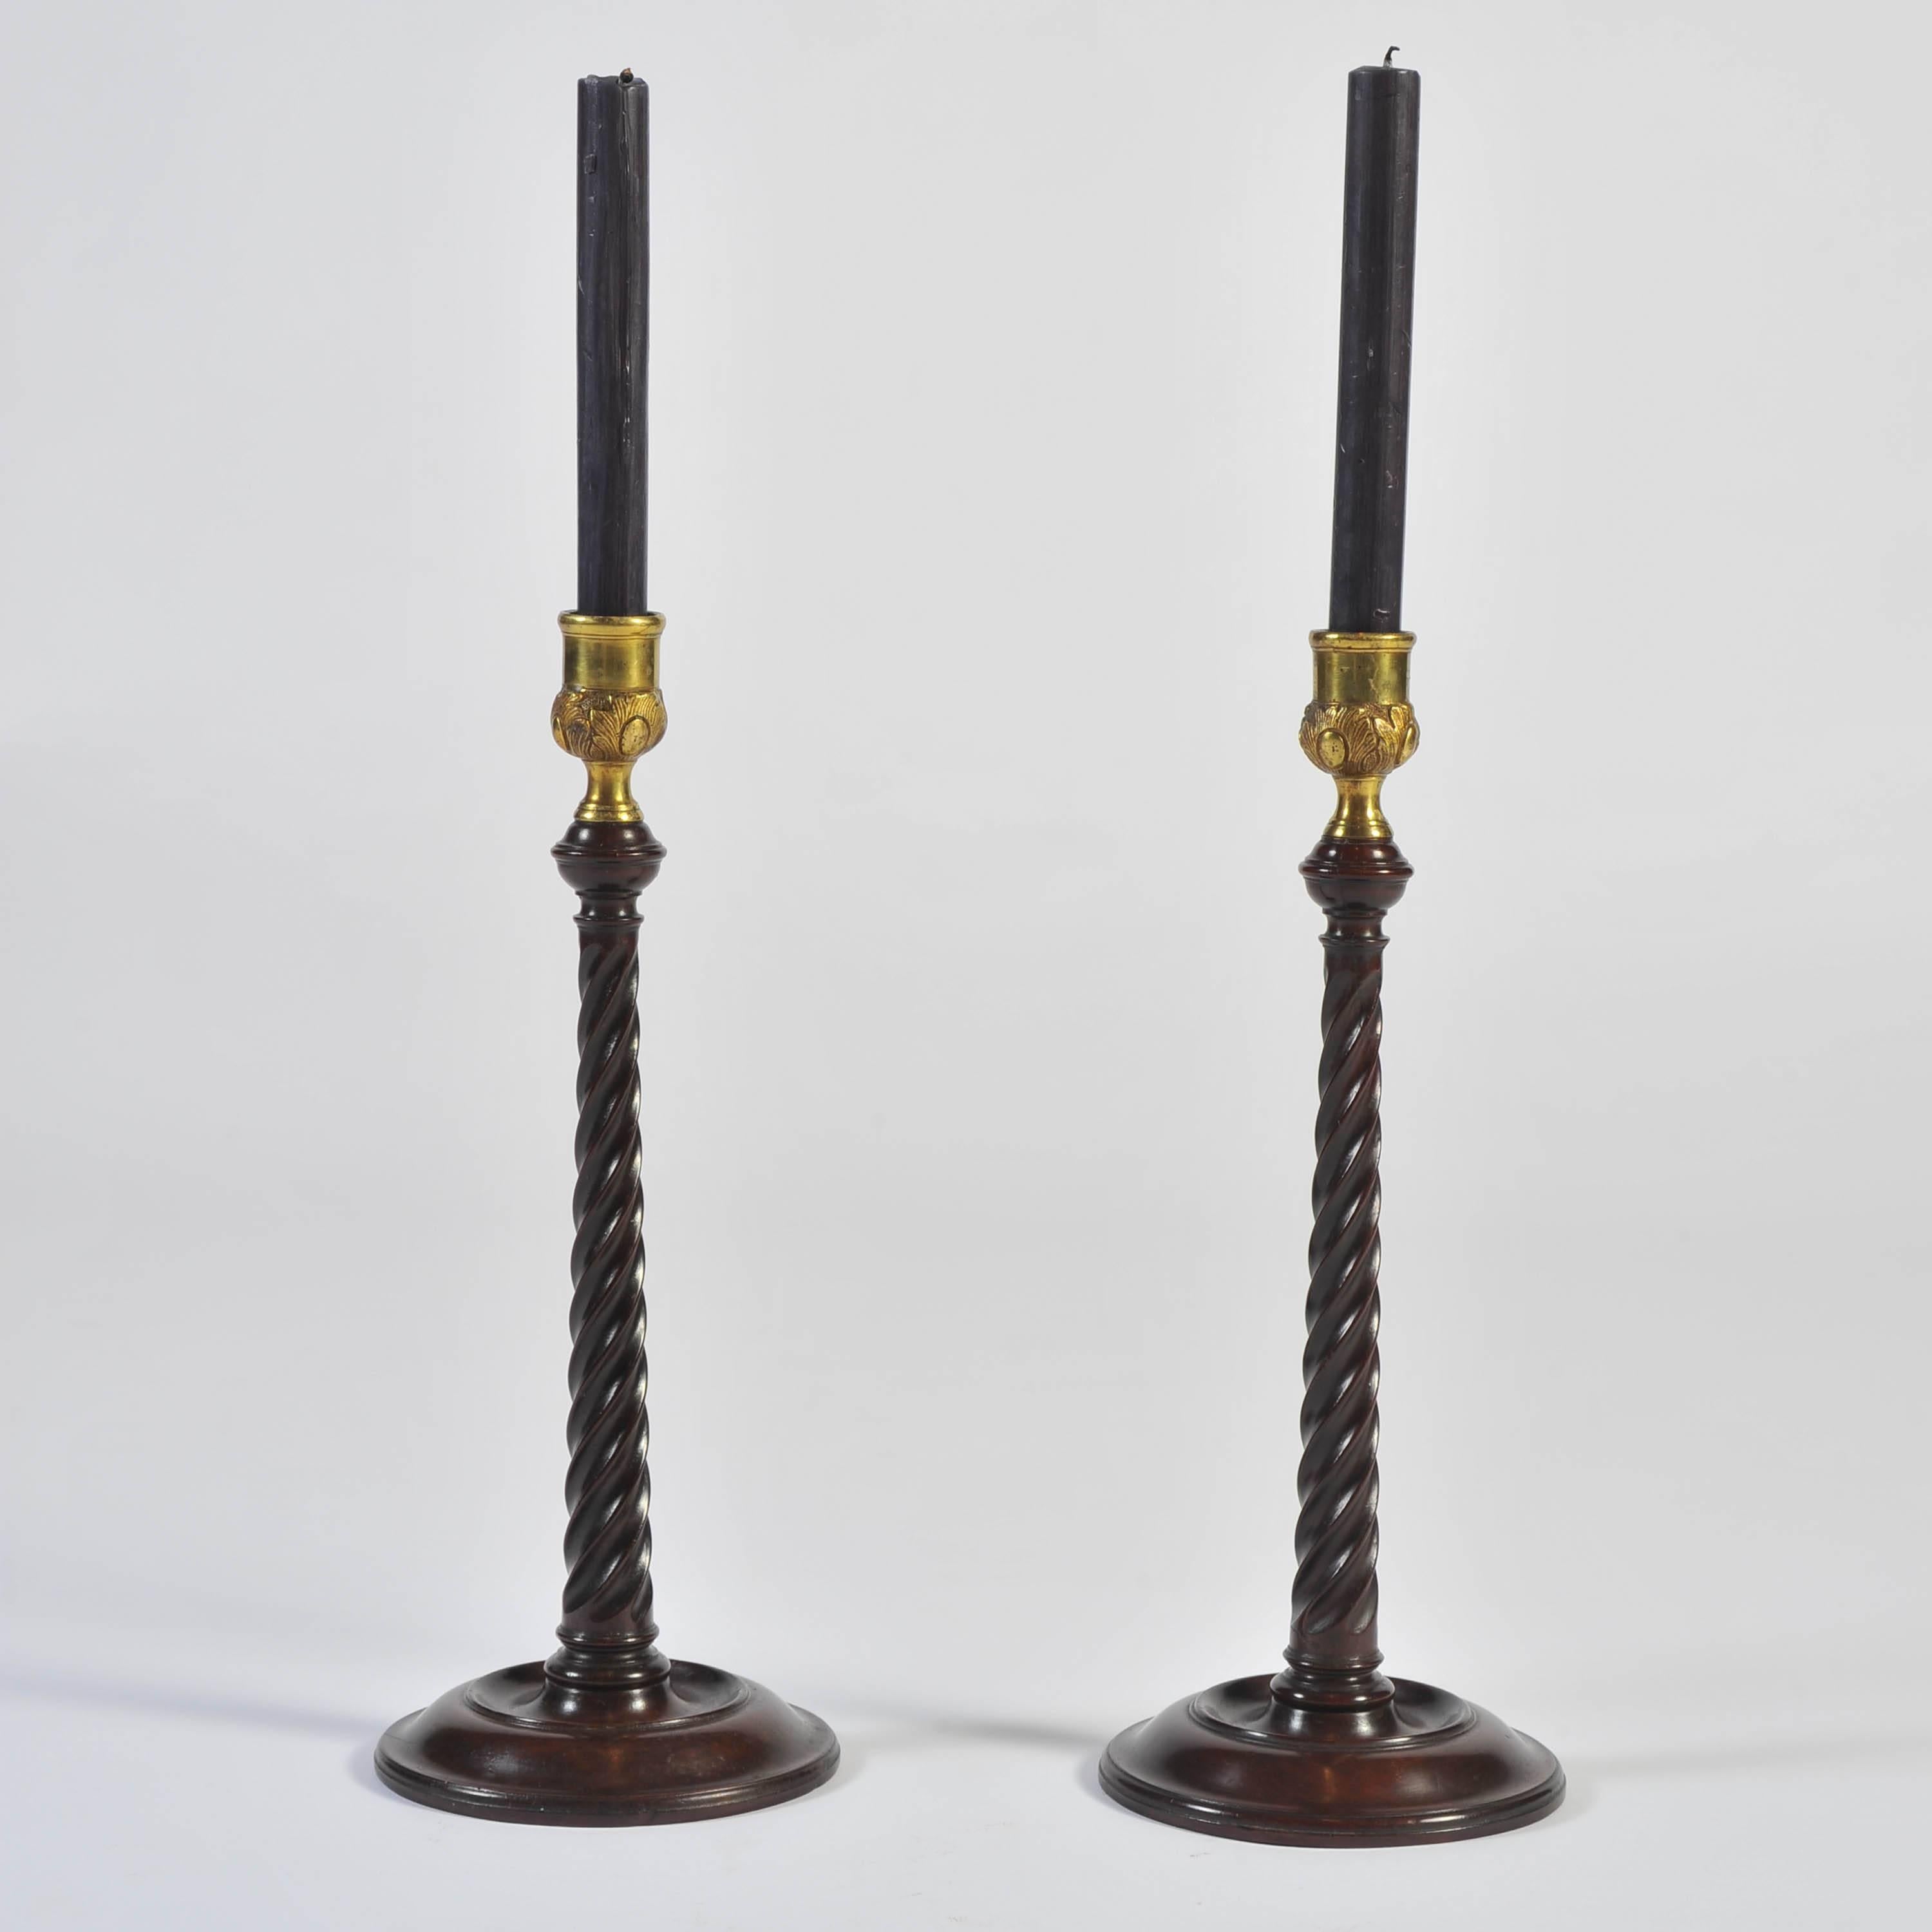 These wonderful candlesticks with moulded bases, spiral twist stems and brass sconces.
Good scale, superb rich color and in fabulous condition.
The bases lead filled as they should be.